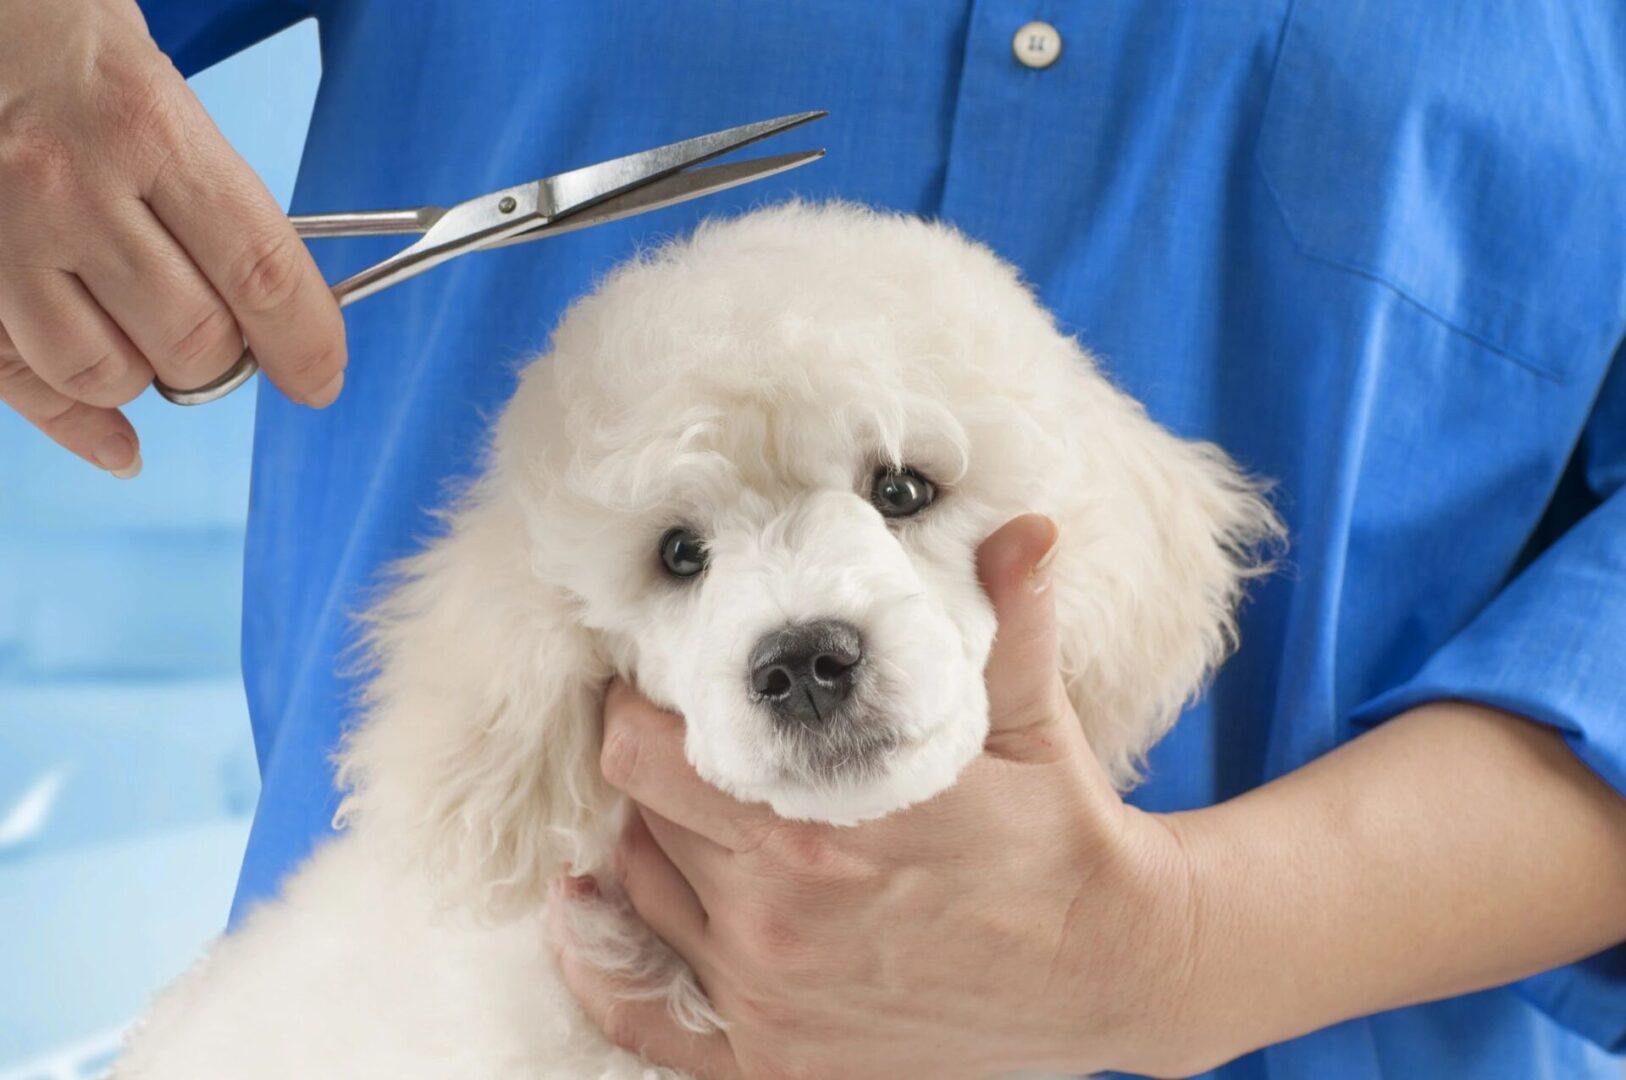 A person holding a dog 's head while it is being trimmed.